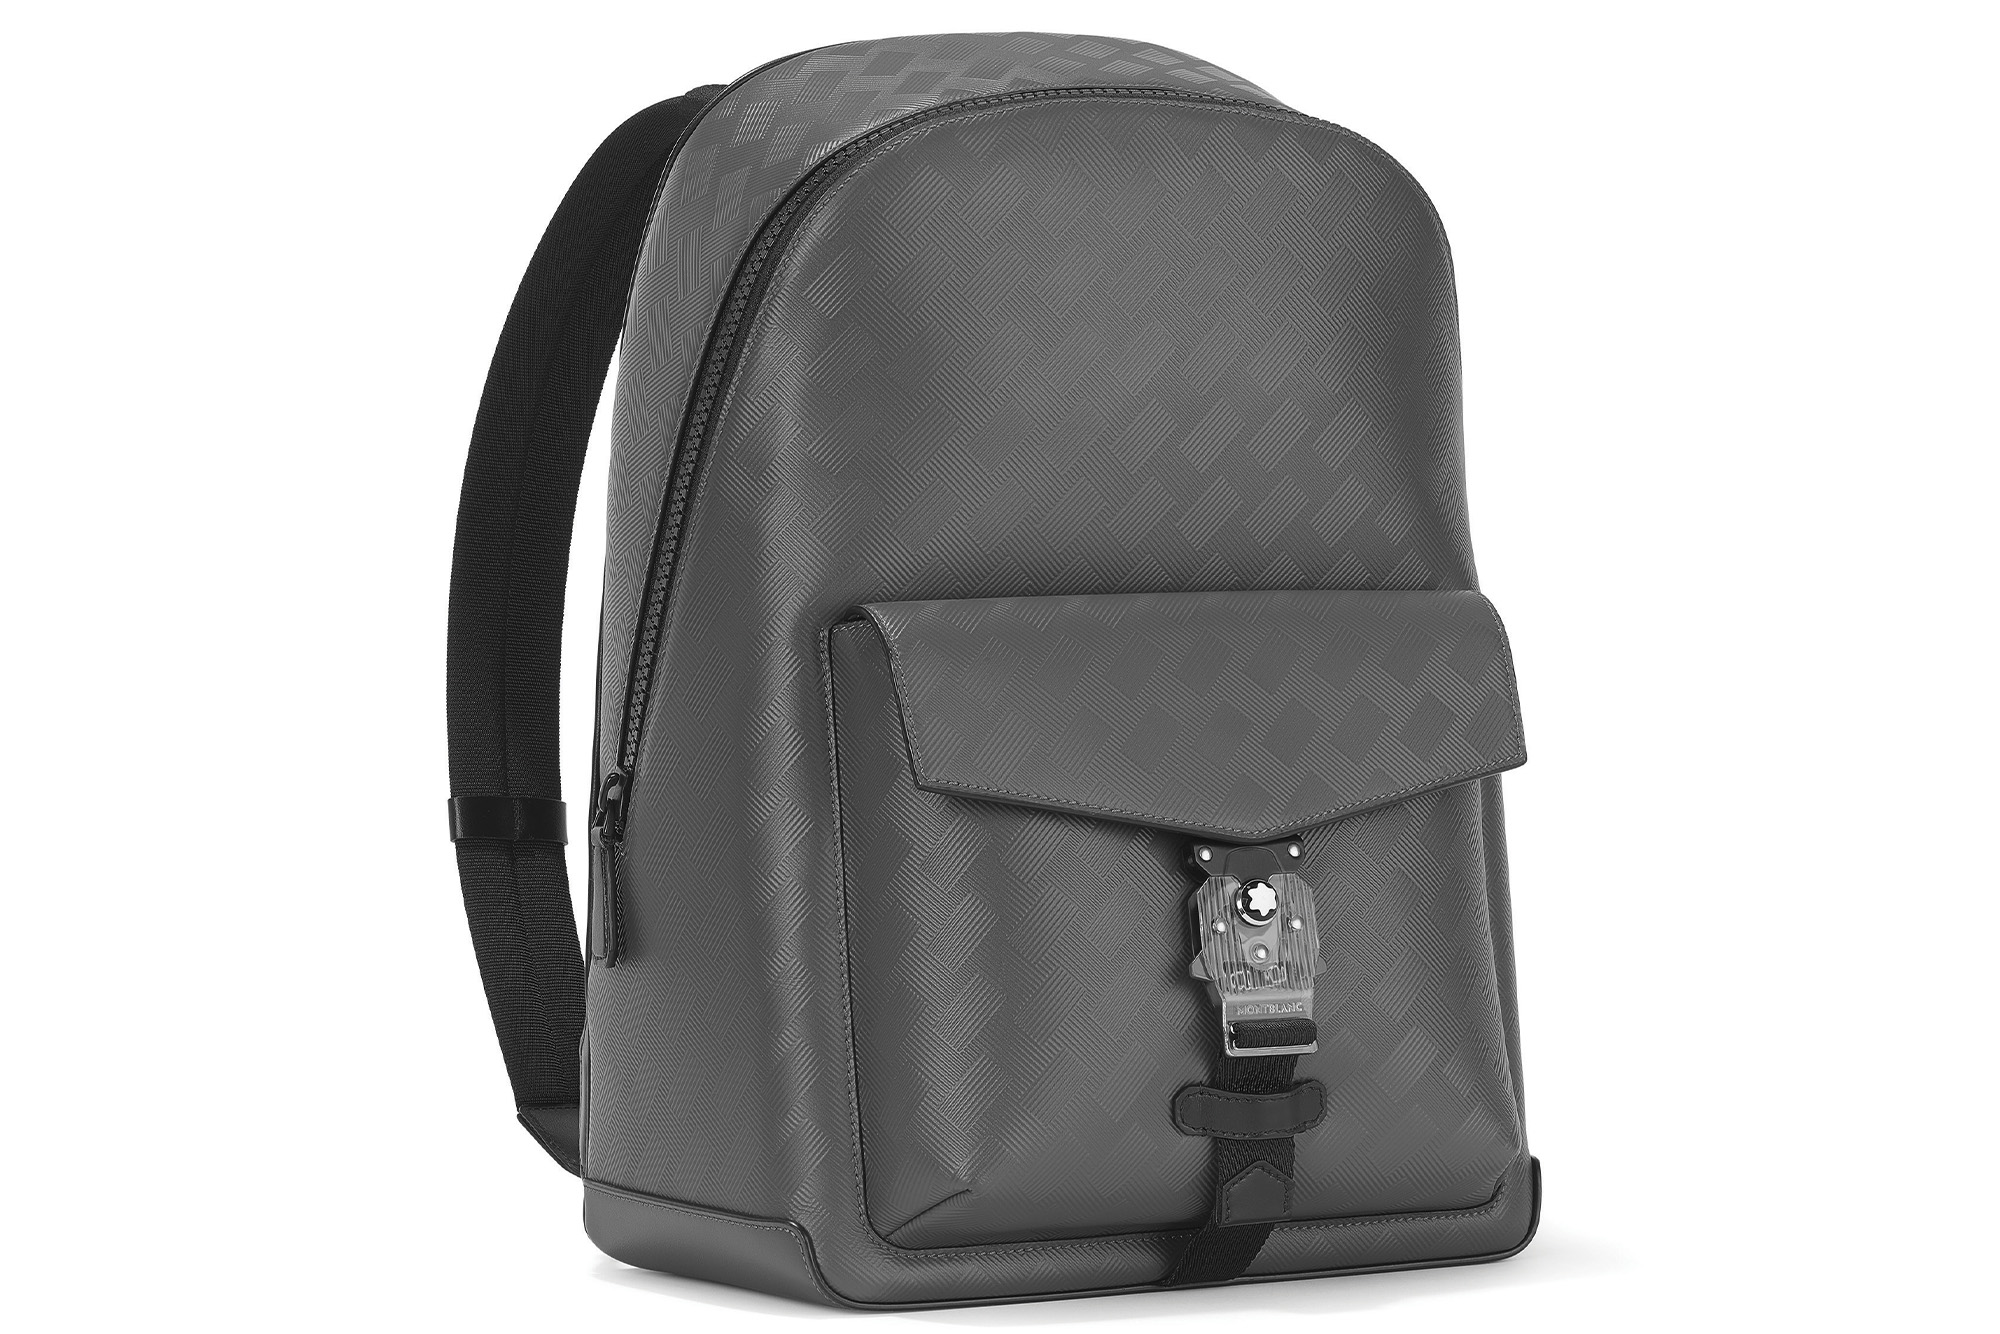 MONTBLANC EXTREME 3.0 BACKPACK WITH M LOCK 4810 BUCKLE. ($2,160)